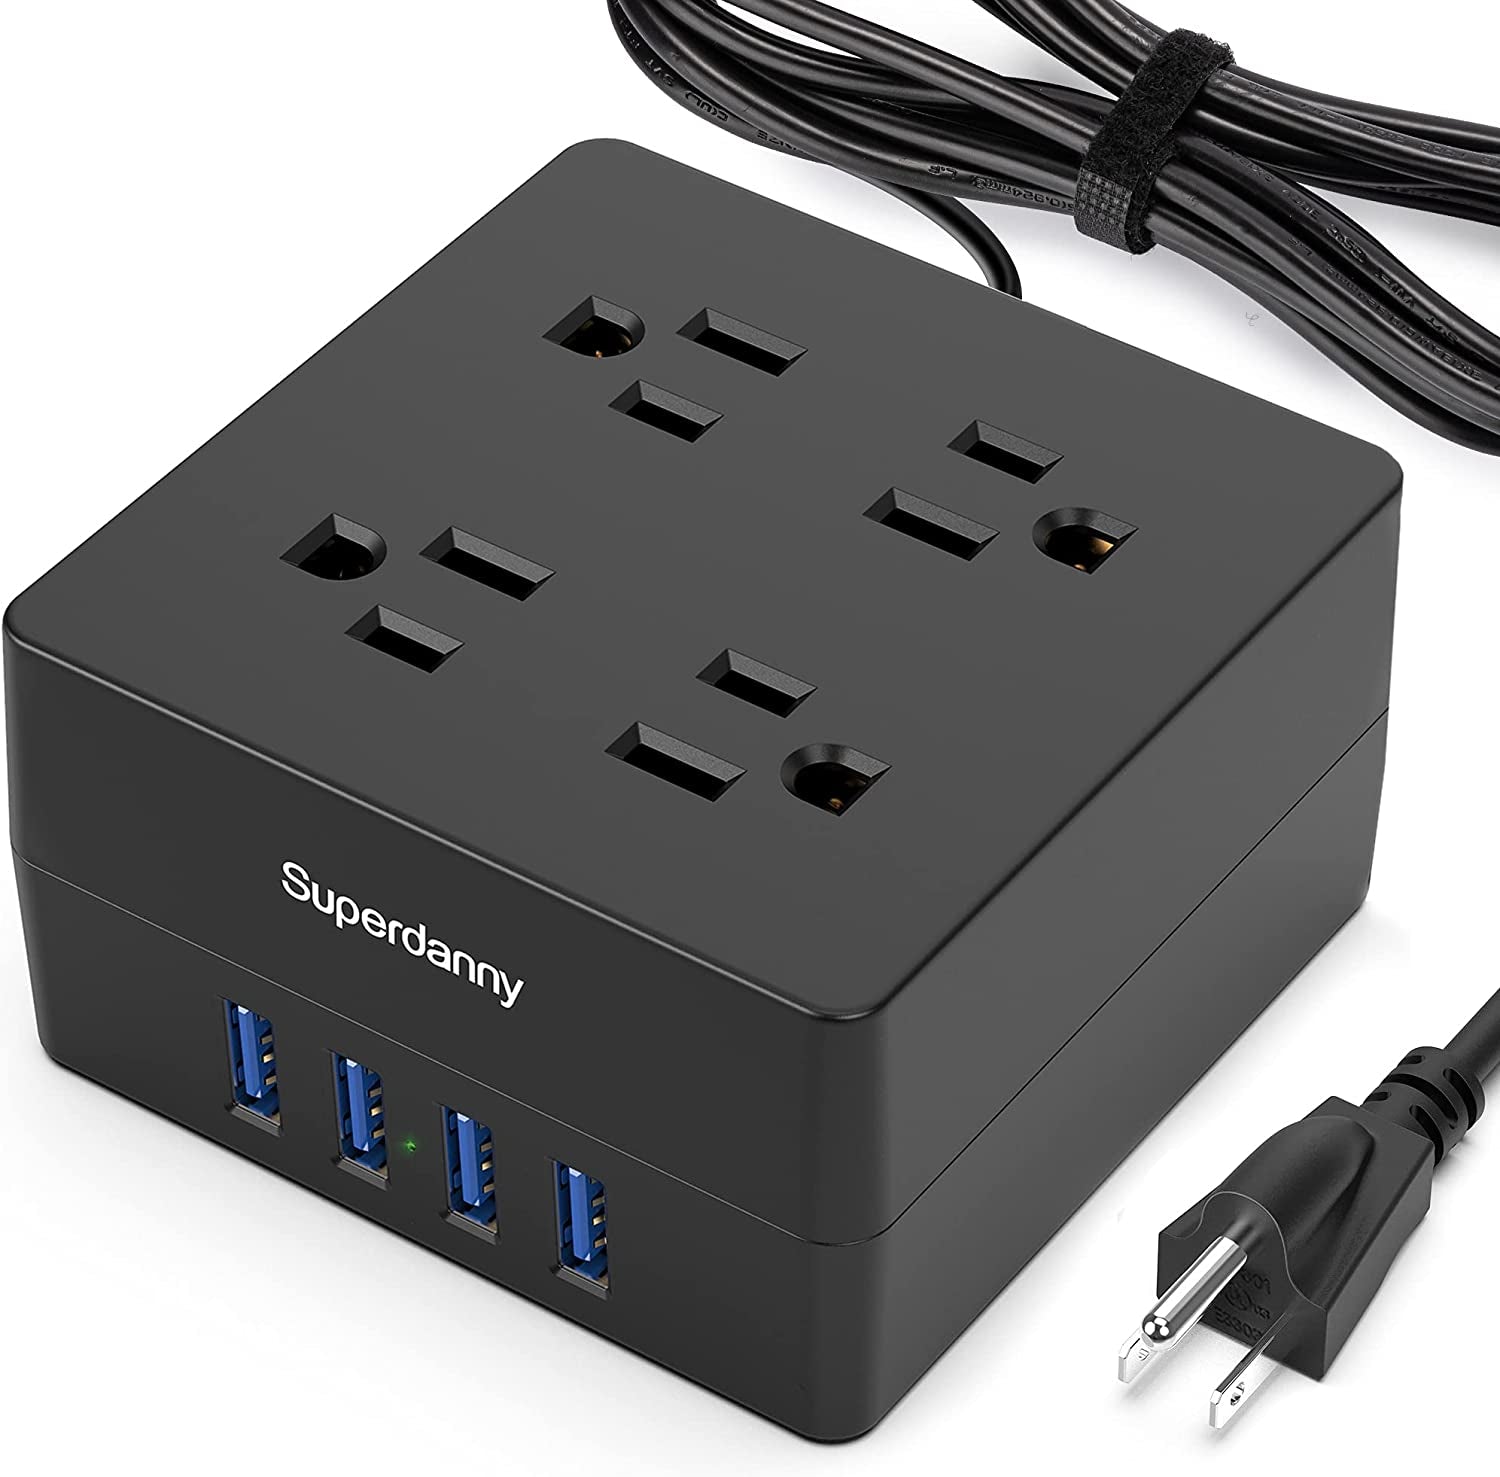 4 Widely Spaced AC Outlets and 4 Smart Charging USB Surge Protector, Desktop Charging Station with Extension Cord for Home, Office, Hotel, Dorm, RV